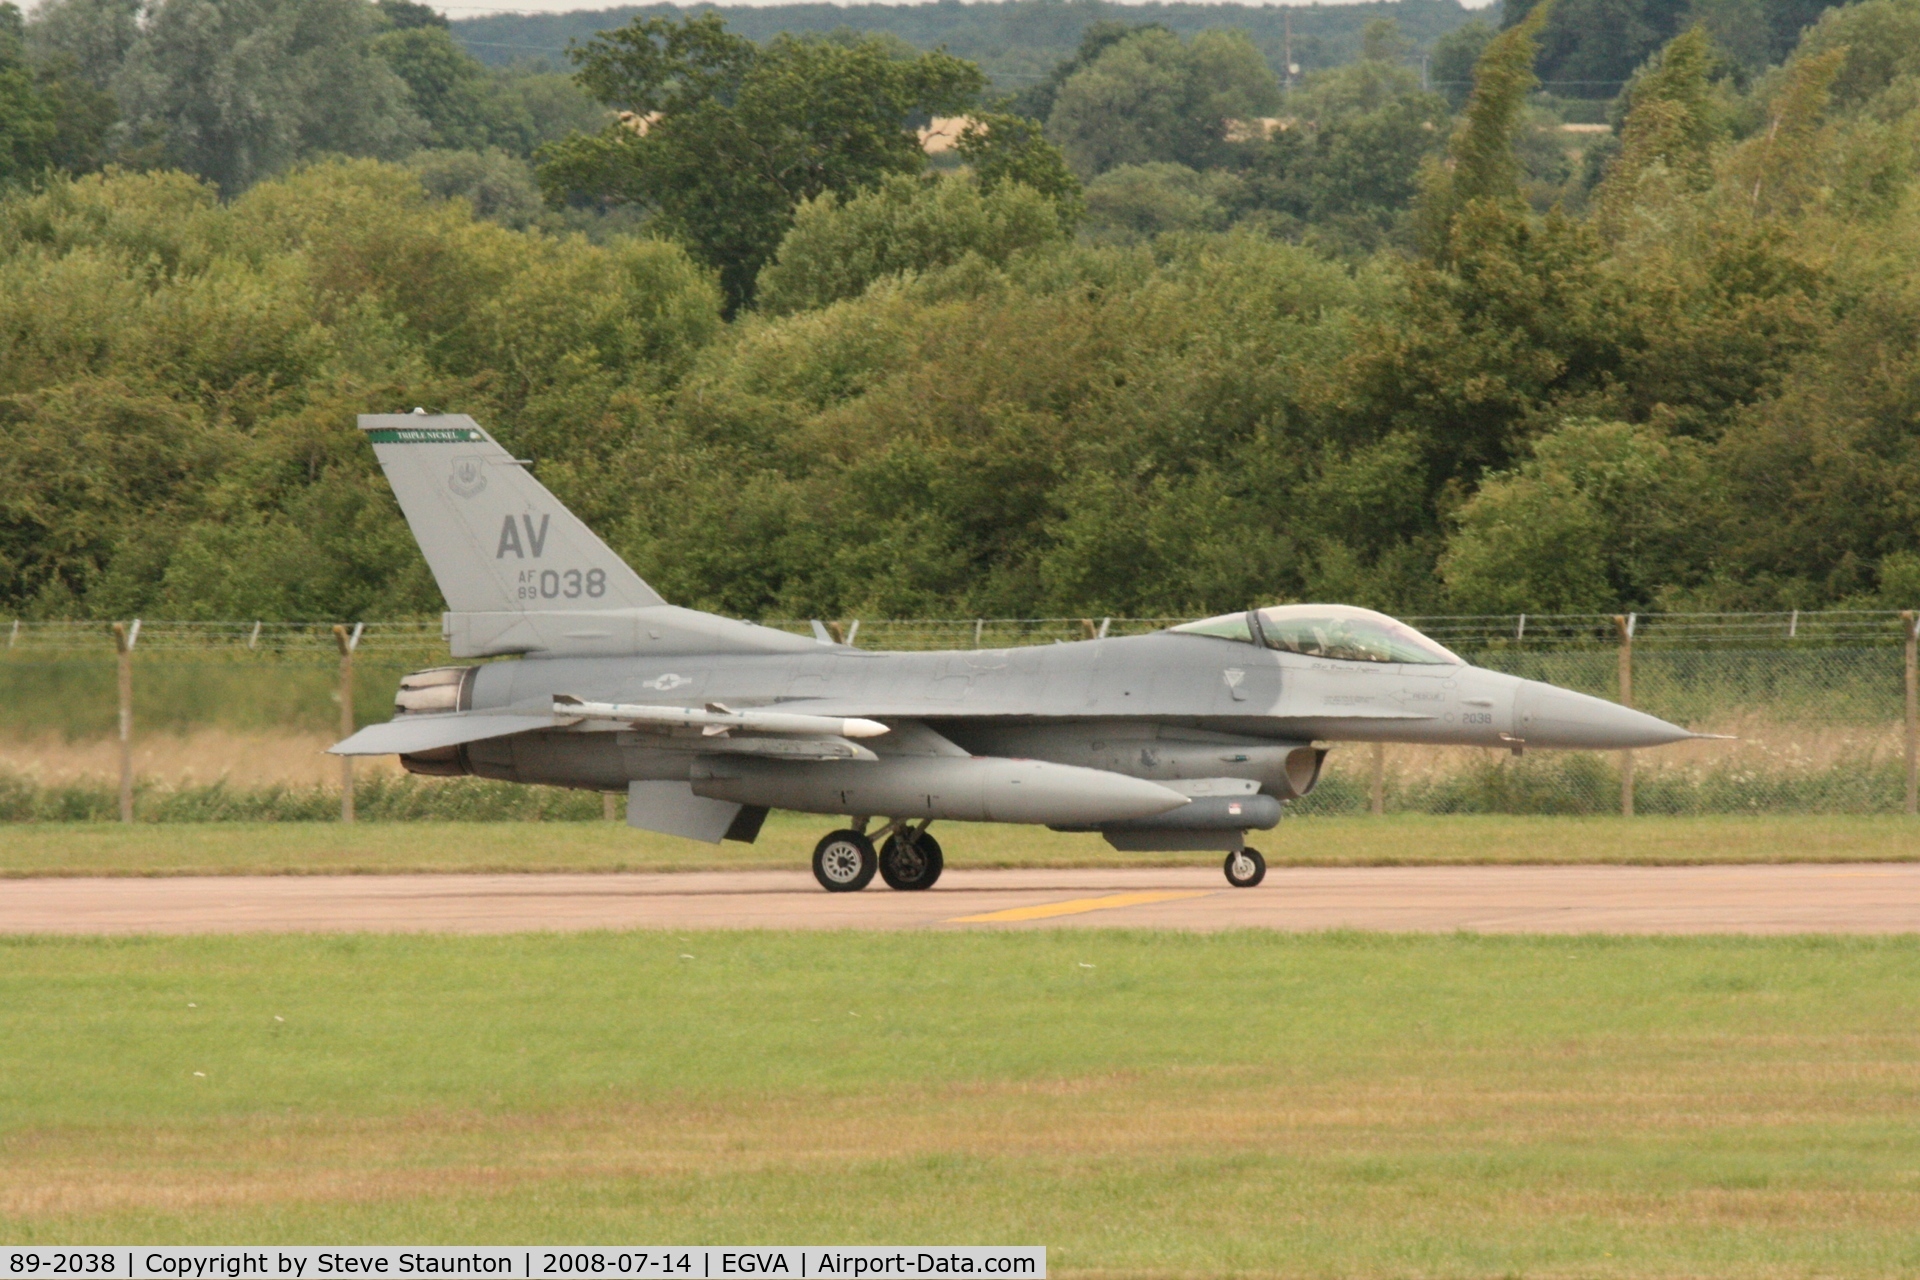 89-2038, 1989 General Dynamics F-16CG Night Falcon C/N 1C-191, Taken at the Royal International Air Tattoo 2008 during arrivals and departures (show days cancelled due to bad weather)